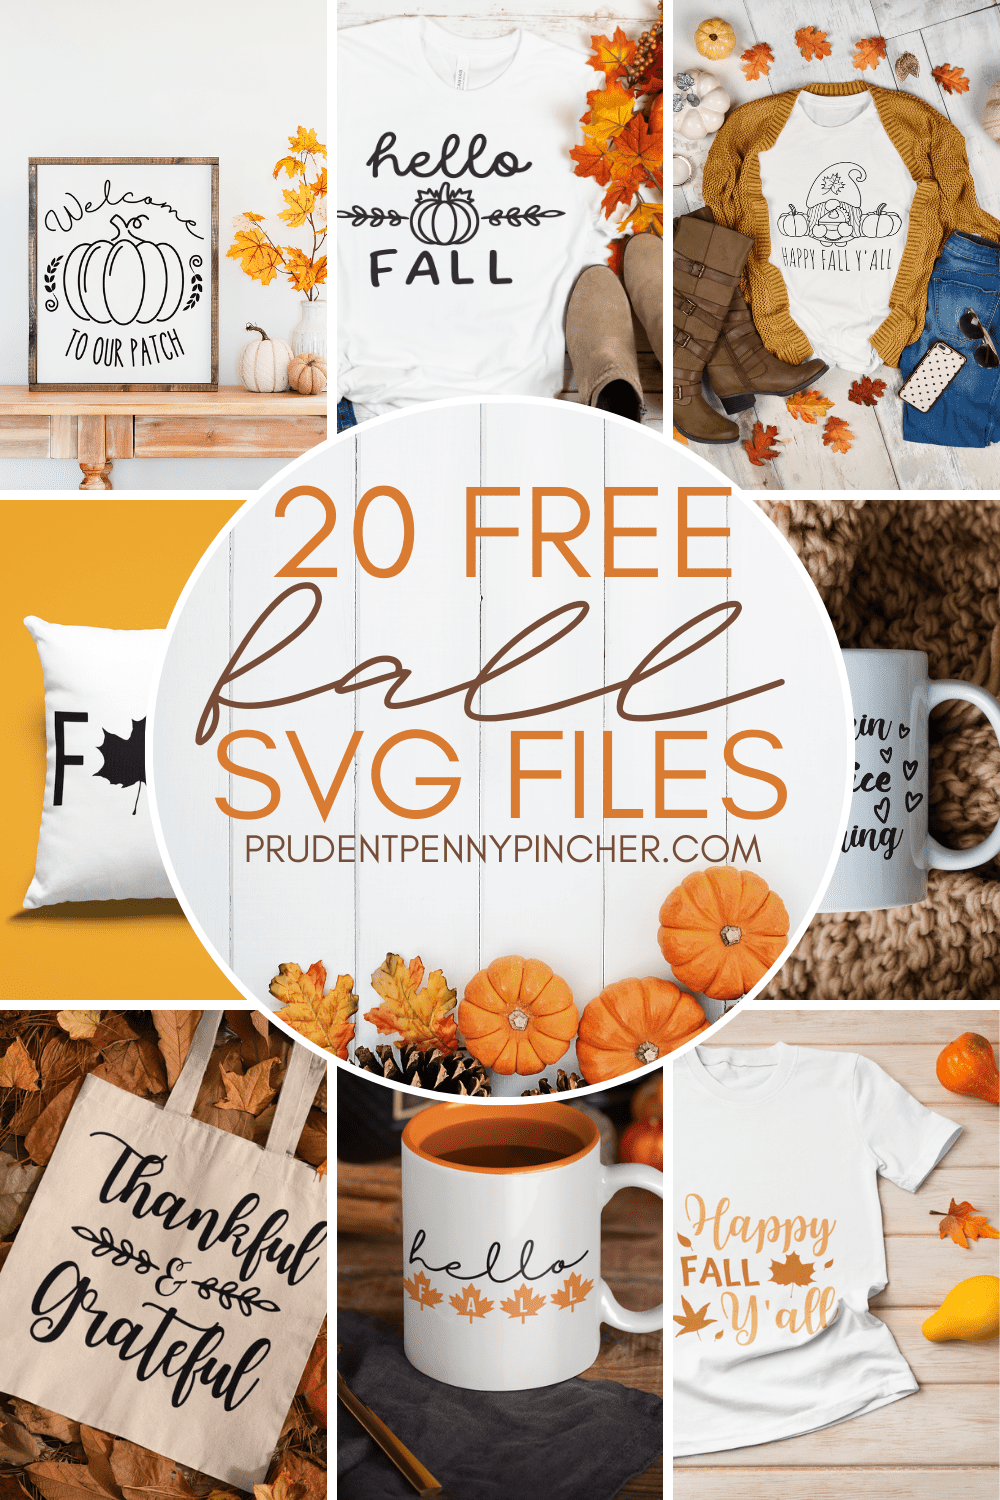 20 Free Fall SVG Files   Prudent Penny Pincher